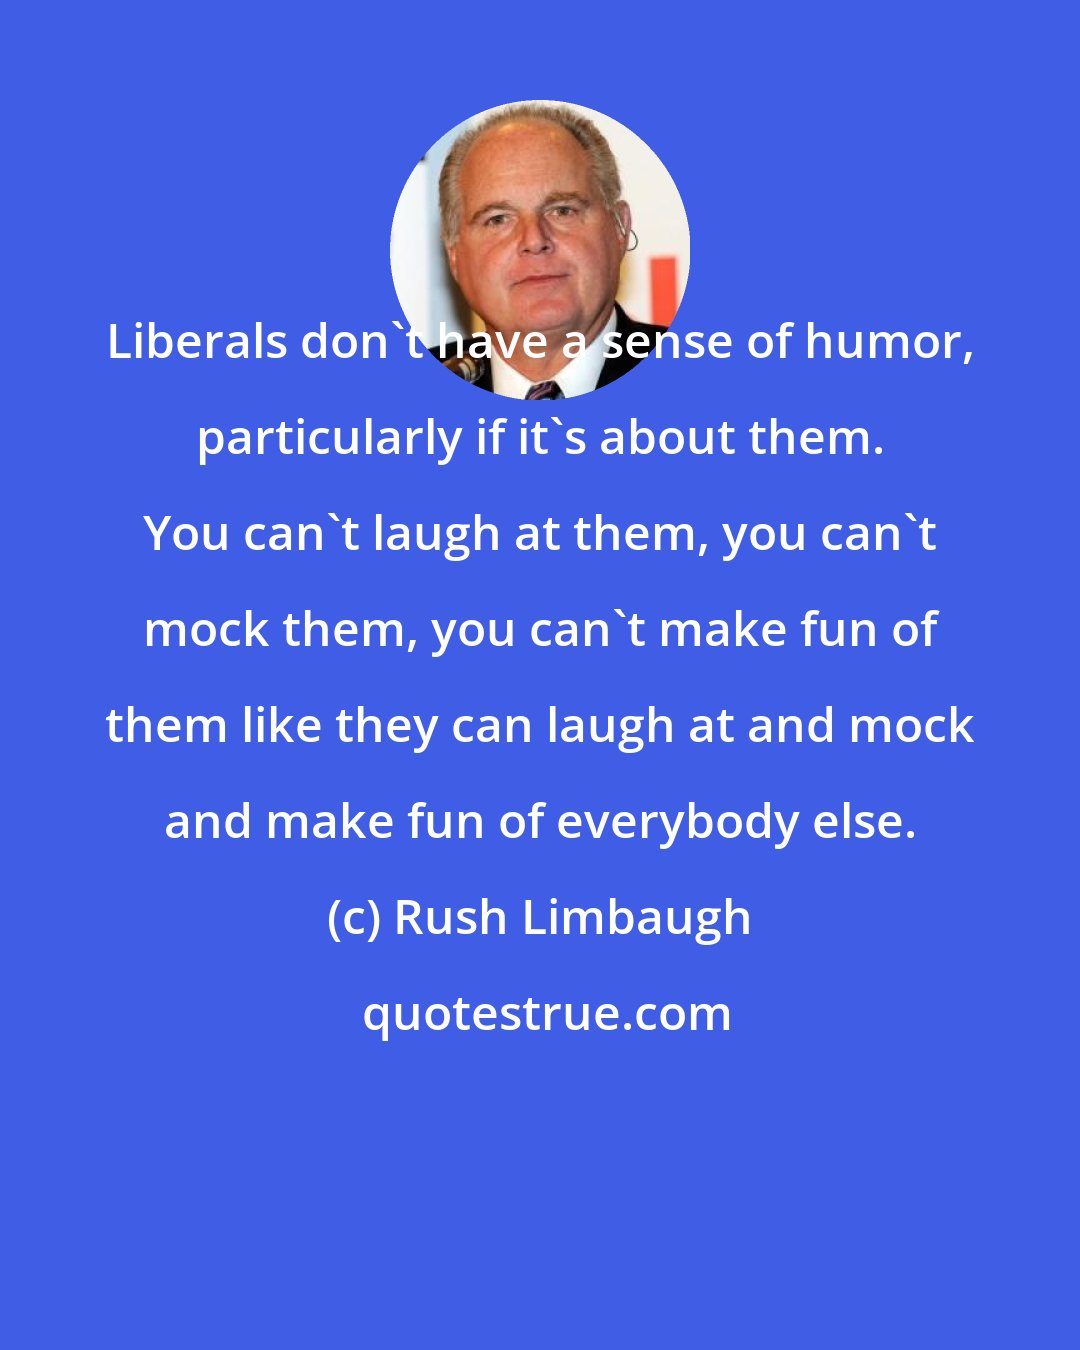 Rush Limbaugh: Liberals don't have a sense of humor, particularly if it's about them. You can't laugh at them, you can't mock them, you can't make fun of them like they can laugh at and mock and make fun of everybody else.